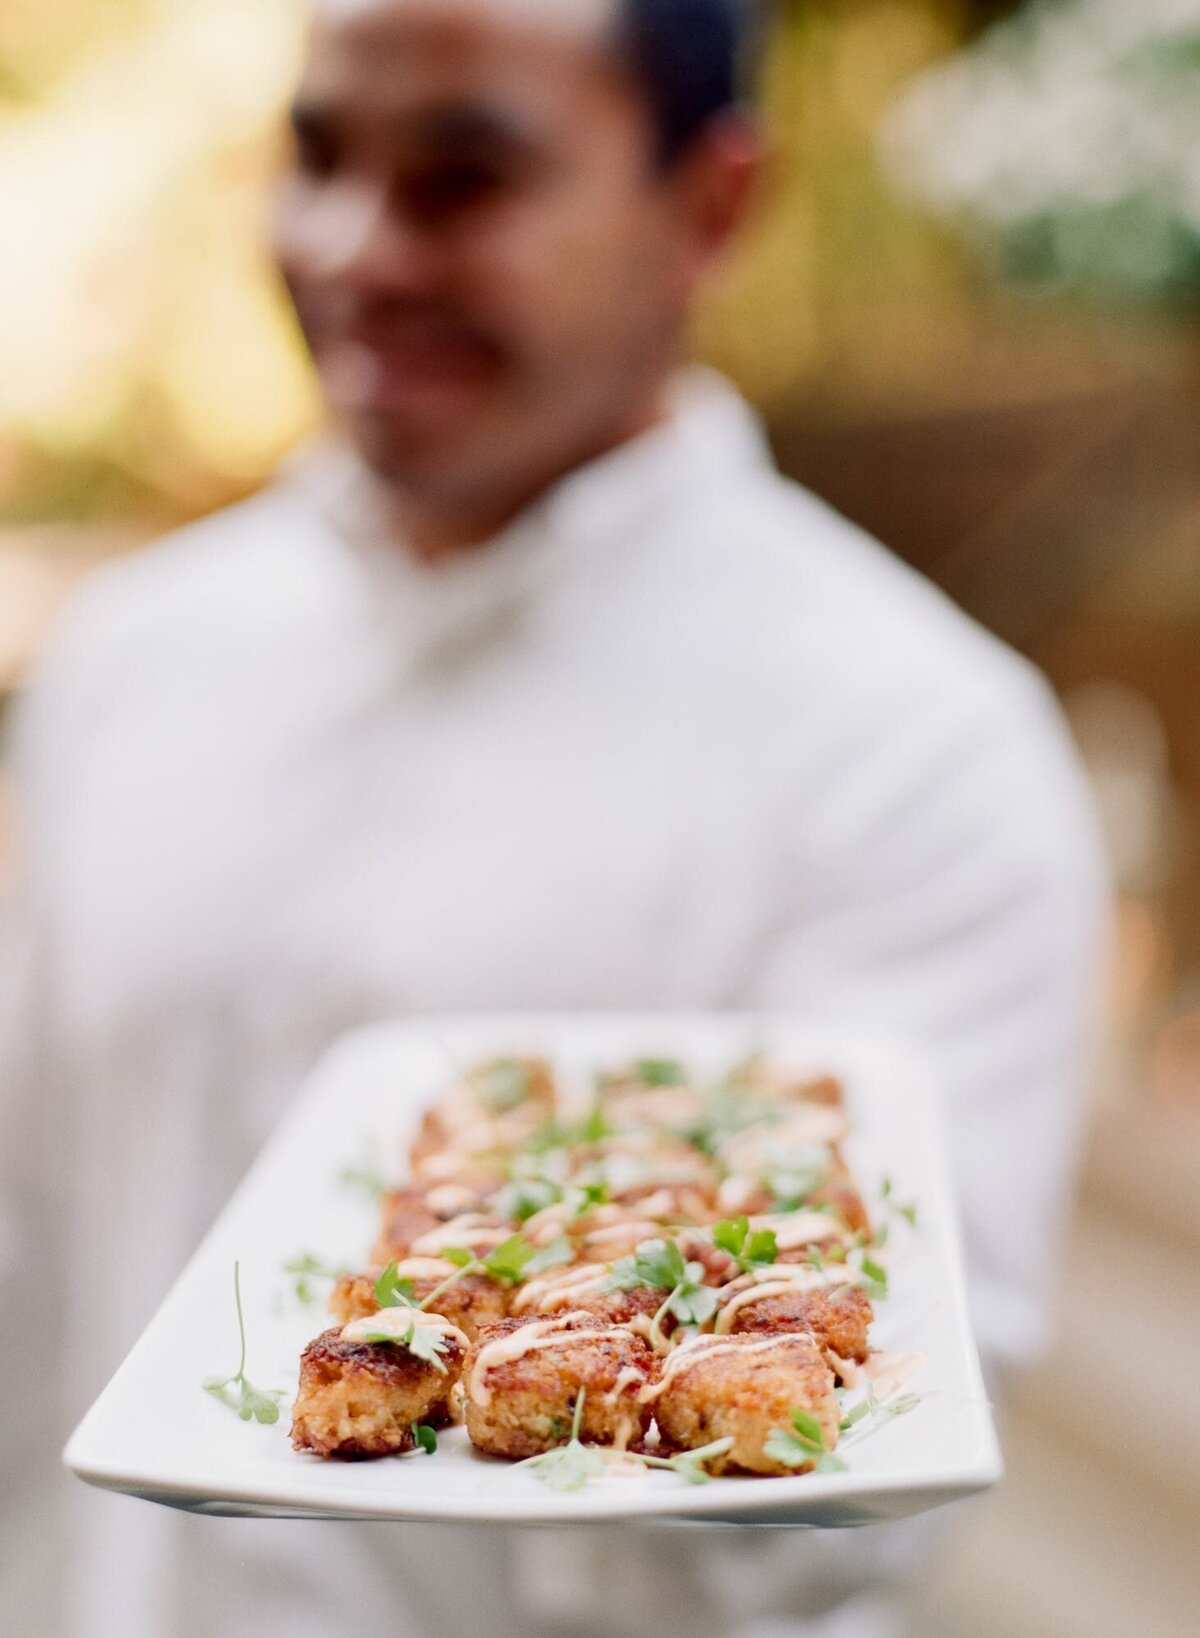 Waiter at a wedding reception presents beautifully garnished and scrumptious appetizers on a white platter.